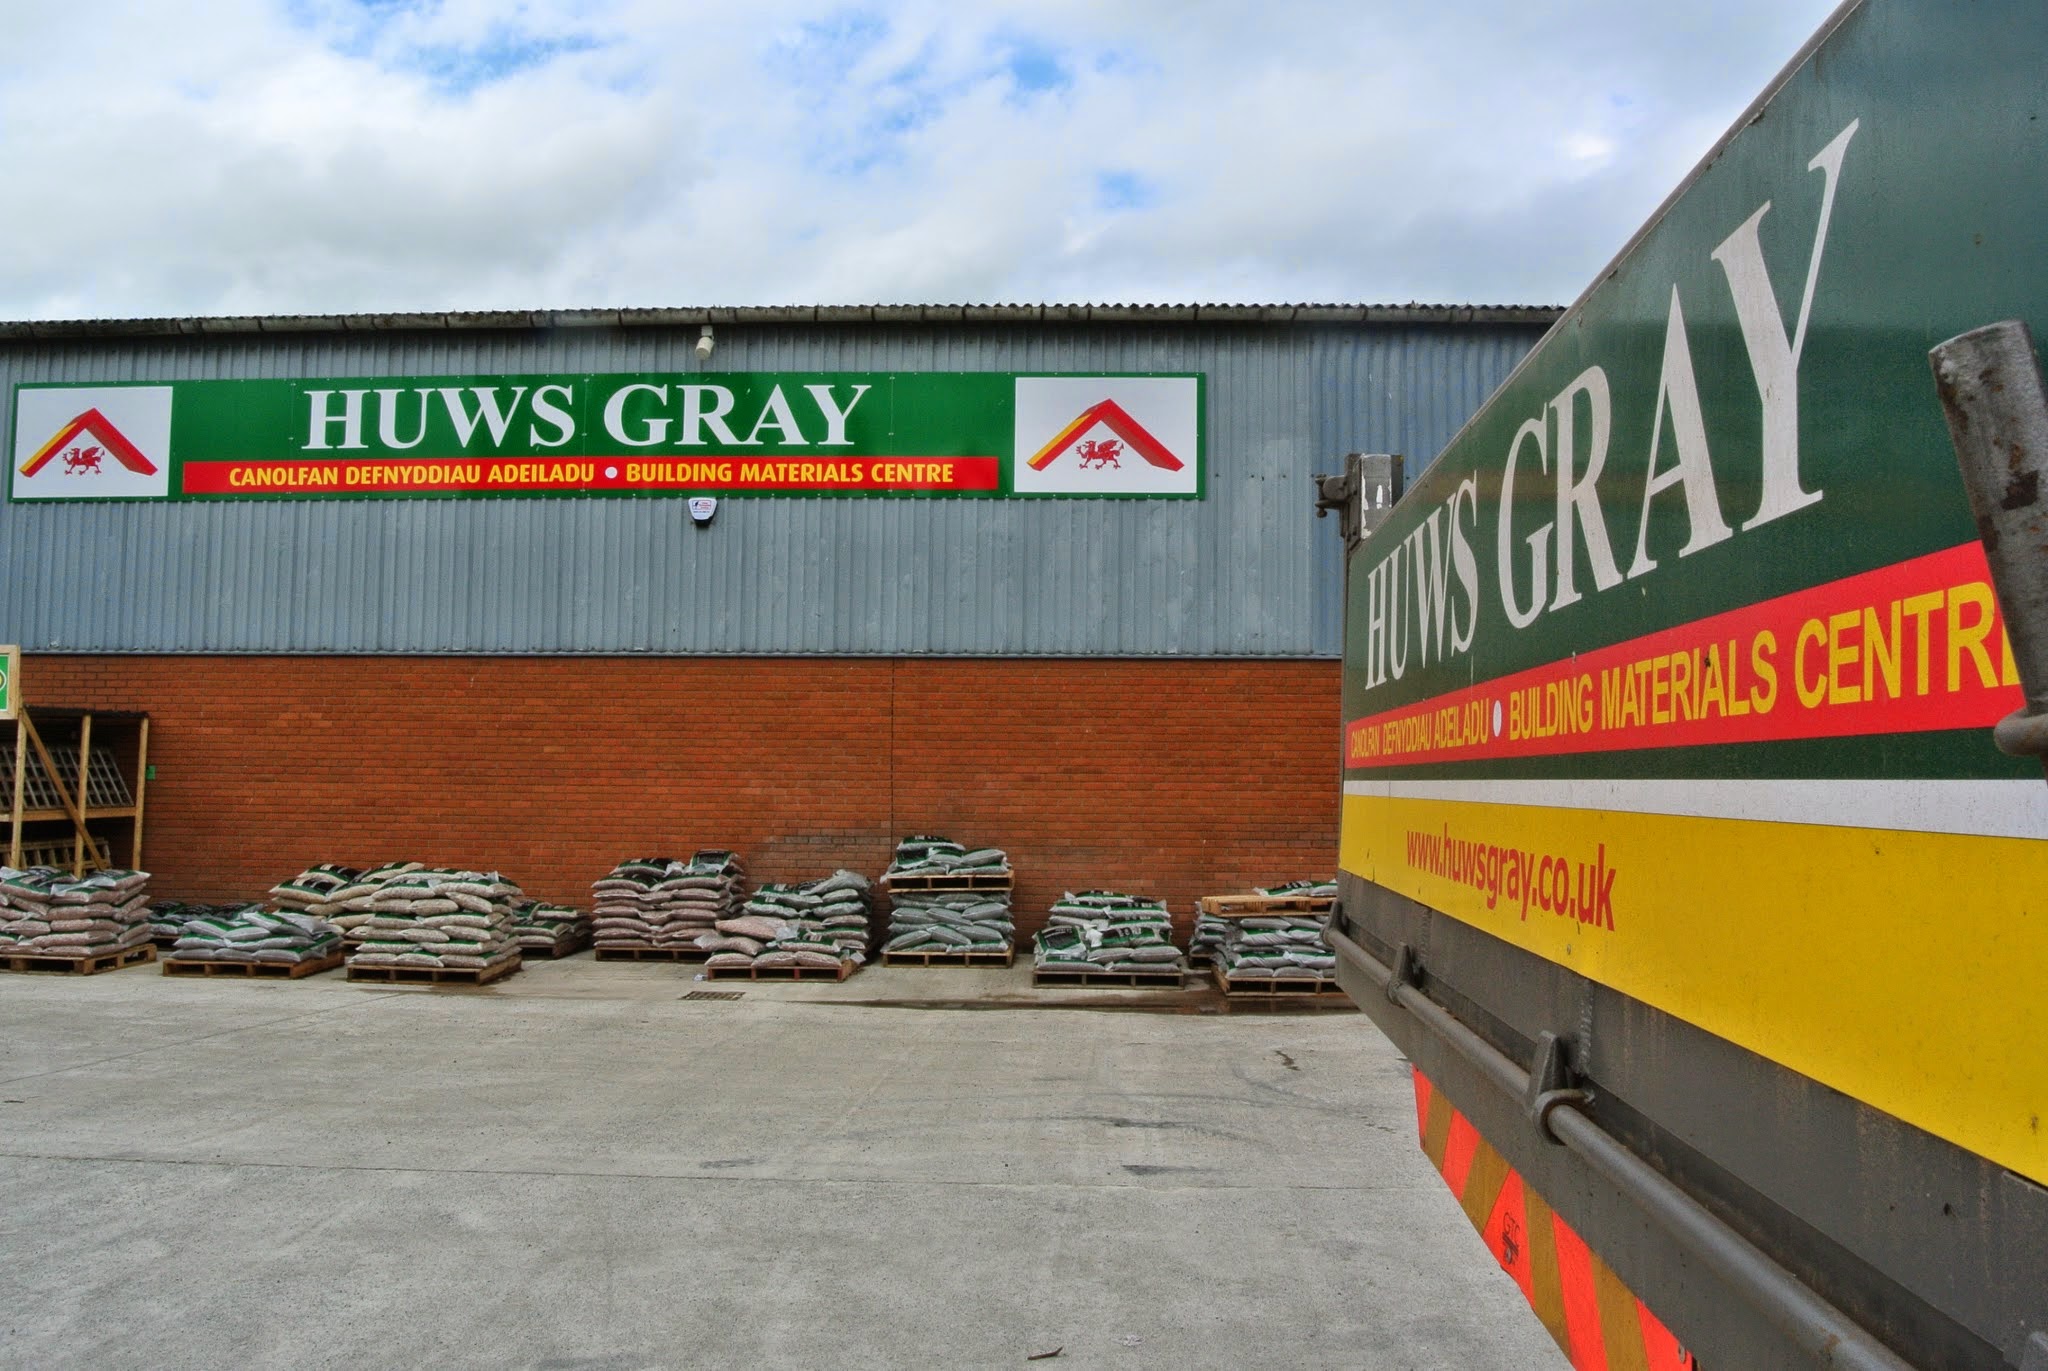 Huws Gray Hay-on-Wye Hereford 01497 820644